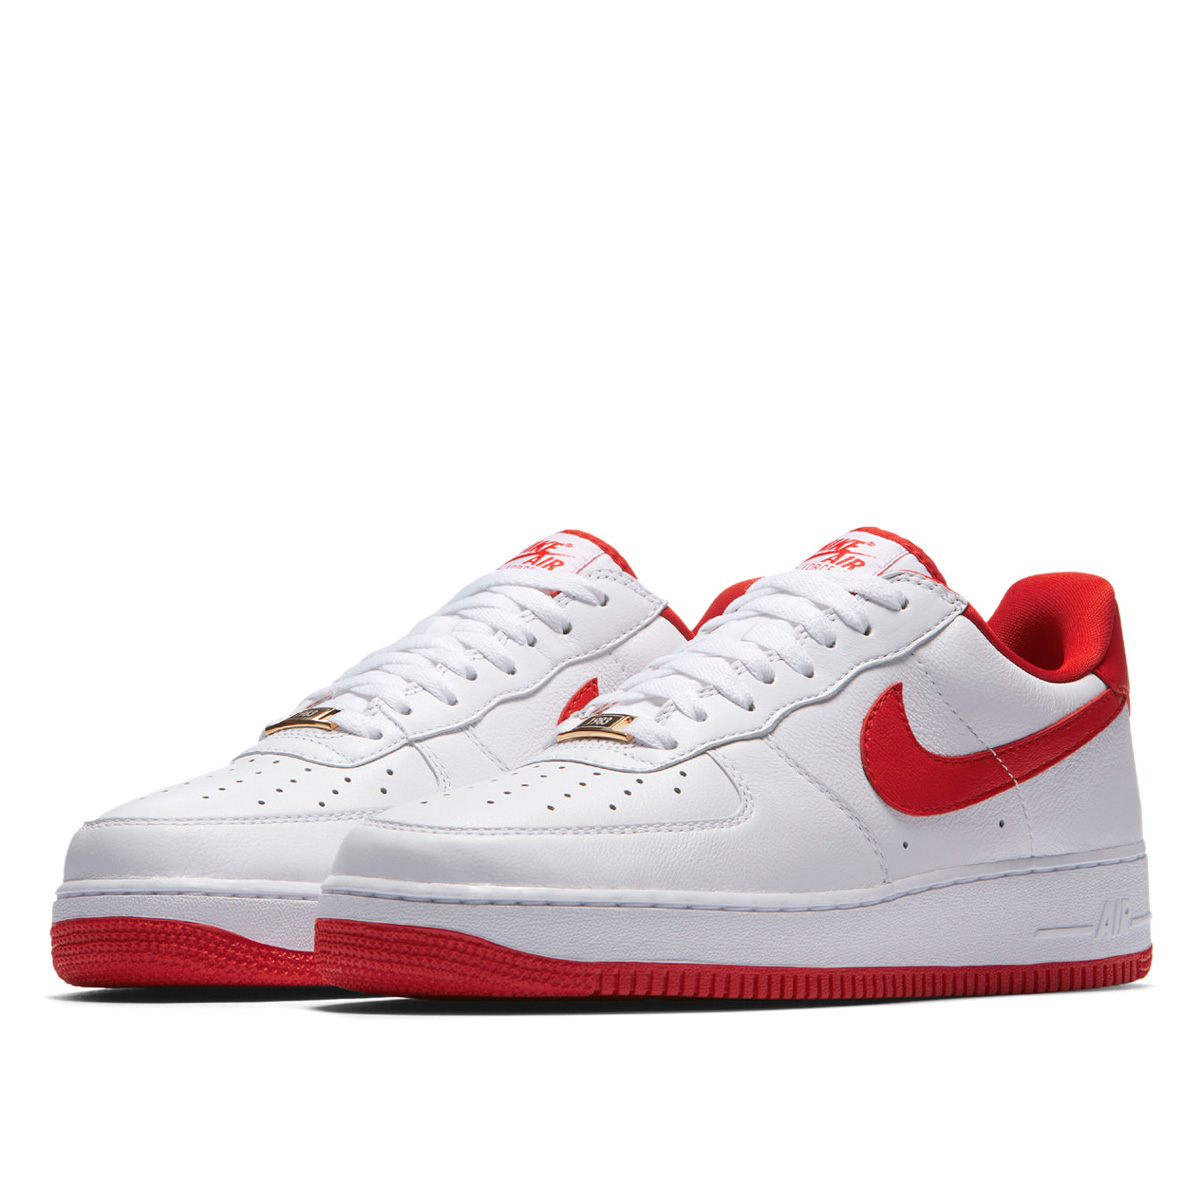 red air forces with gold